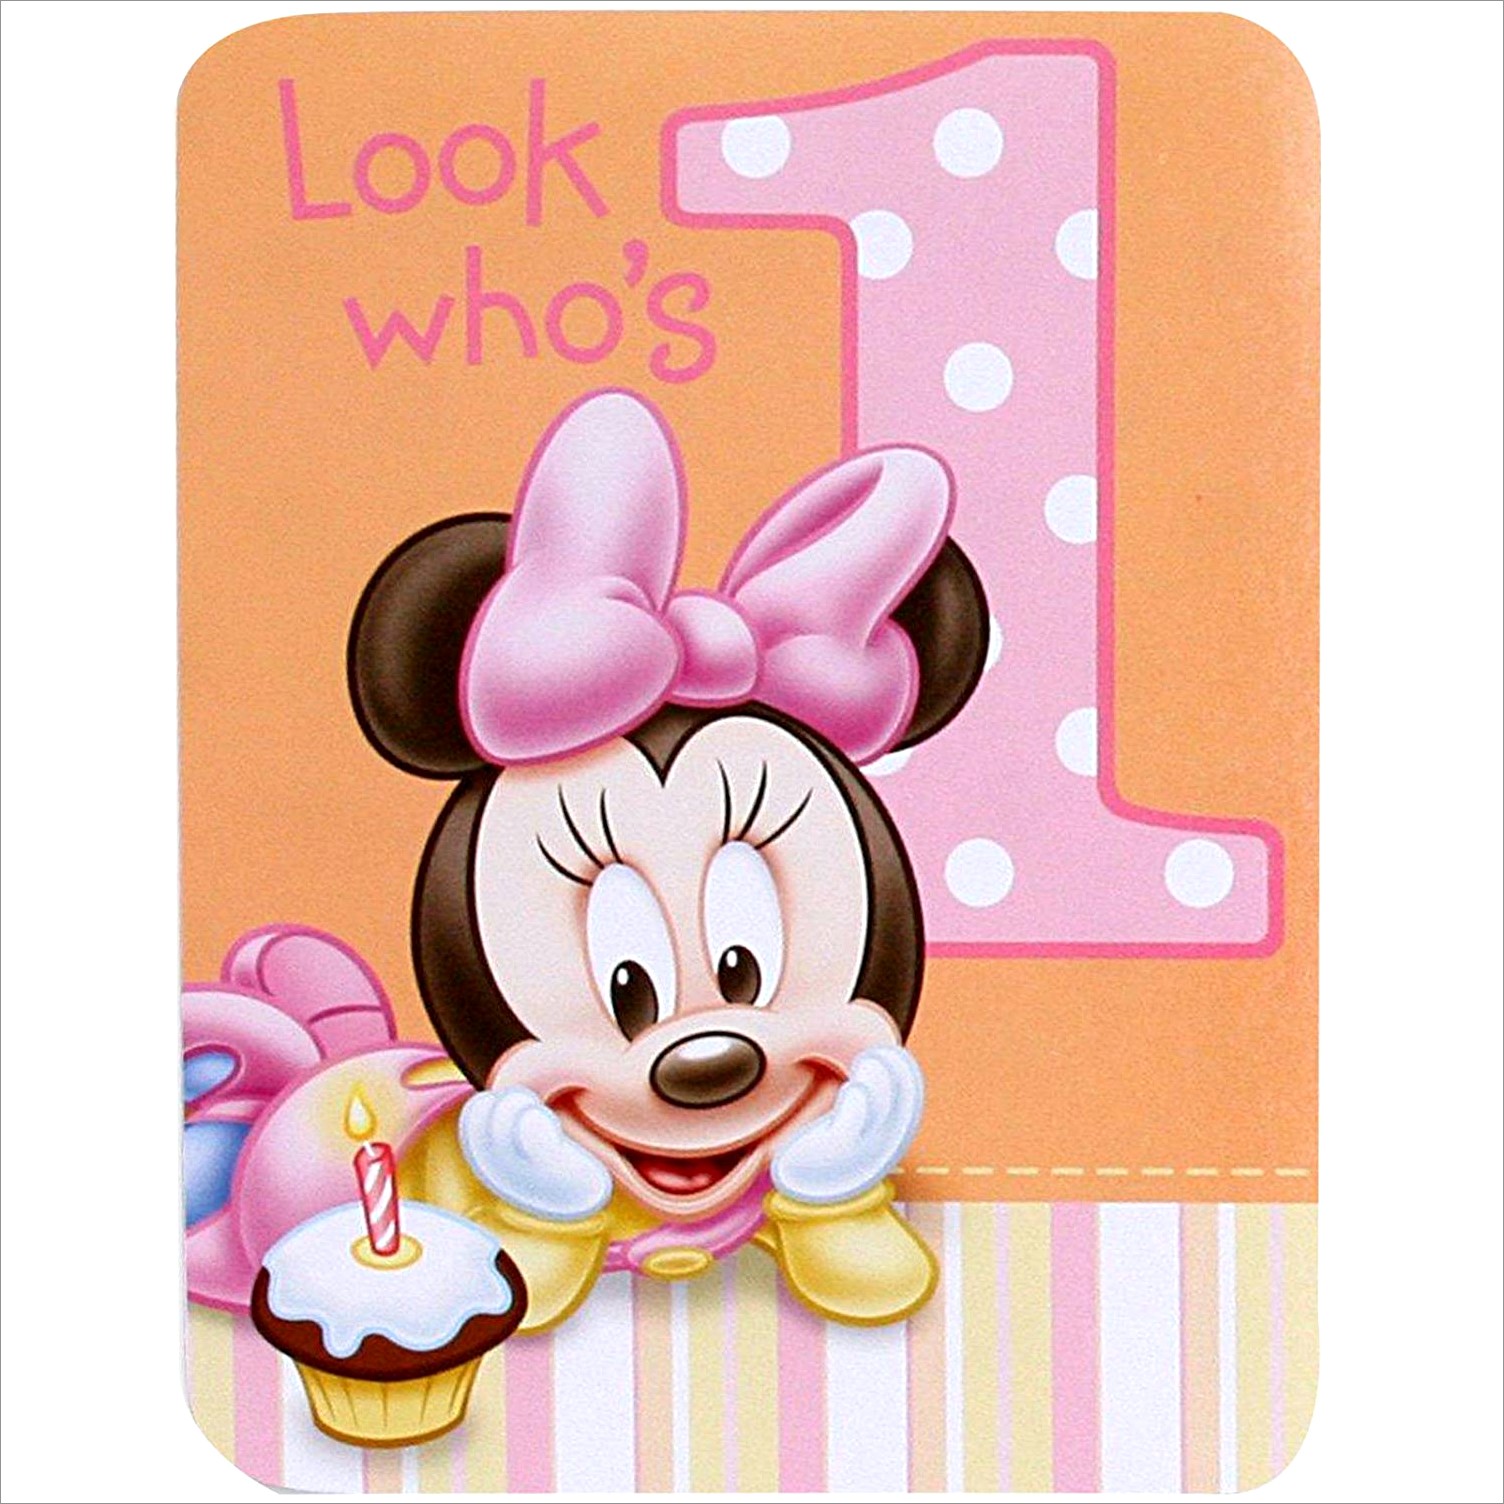 Baby Minnie Mouse 1st Birthday Invitations